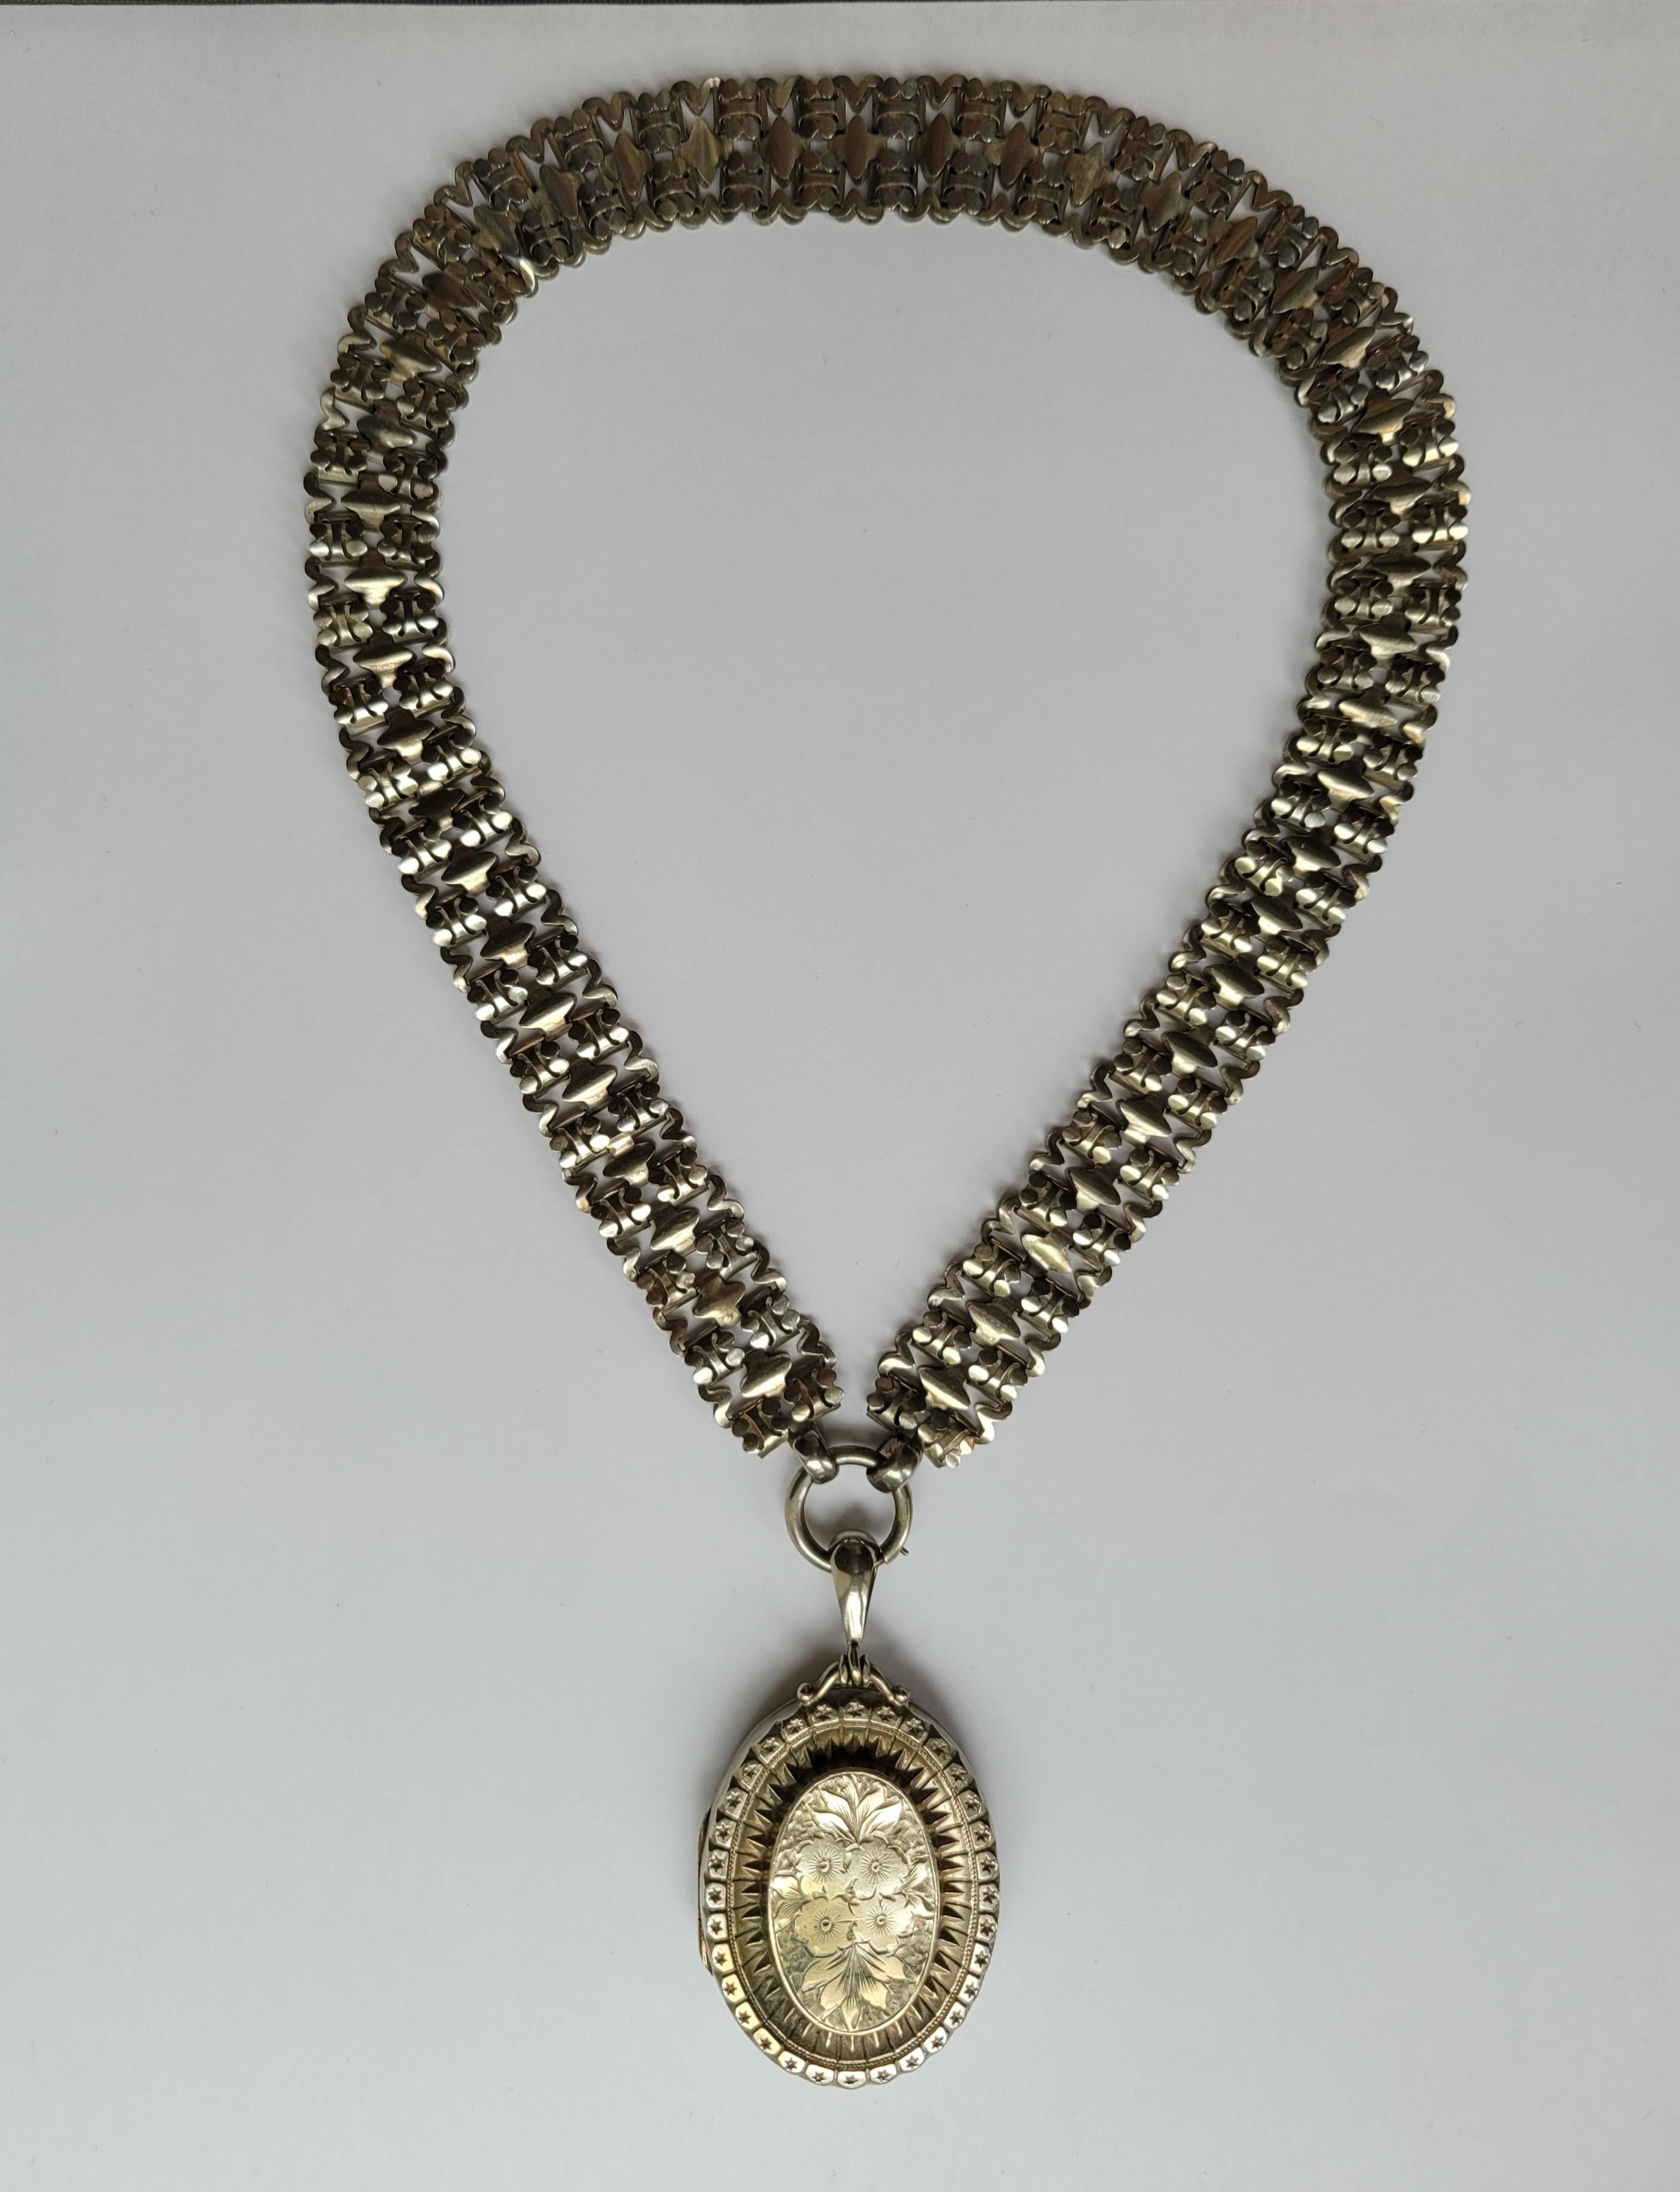 AN IMPRESSIVE VICTORIAN c.1880 ENGRAVED WITH FLOWERS AND FOLIAGE LOCKET PENDANT ON THE BOOK COLLAR  CHAIN. OUTSTANDING LOOKING AND EYE CATCHING NECKLACE. THE NECKLACE MADE OF SILVER COLOR METAL (NOT SILVER).  ENGLISH ORIGIN.

MARKED WITH MAKER MARK